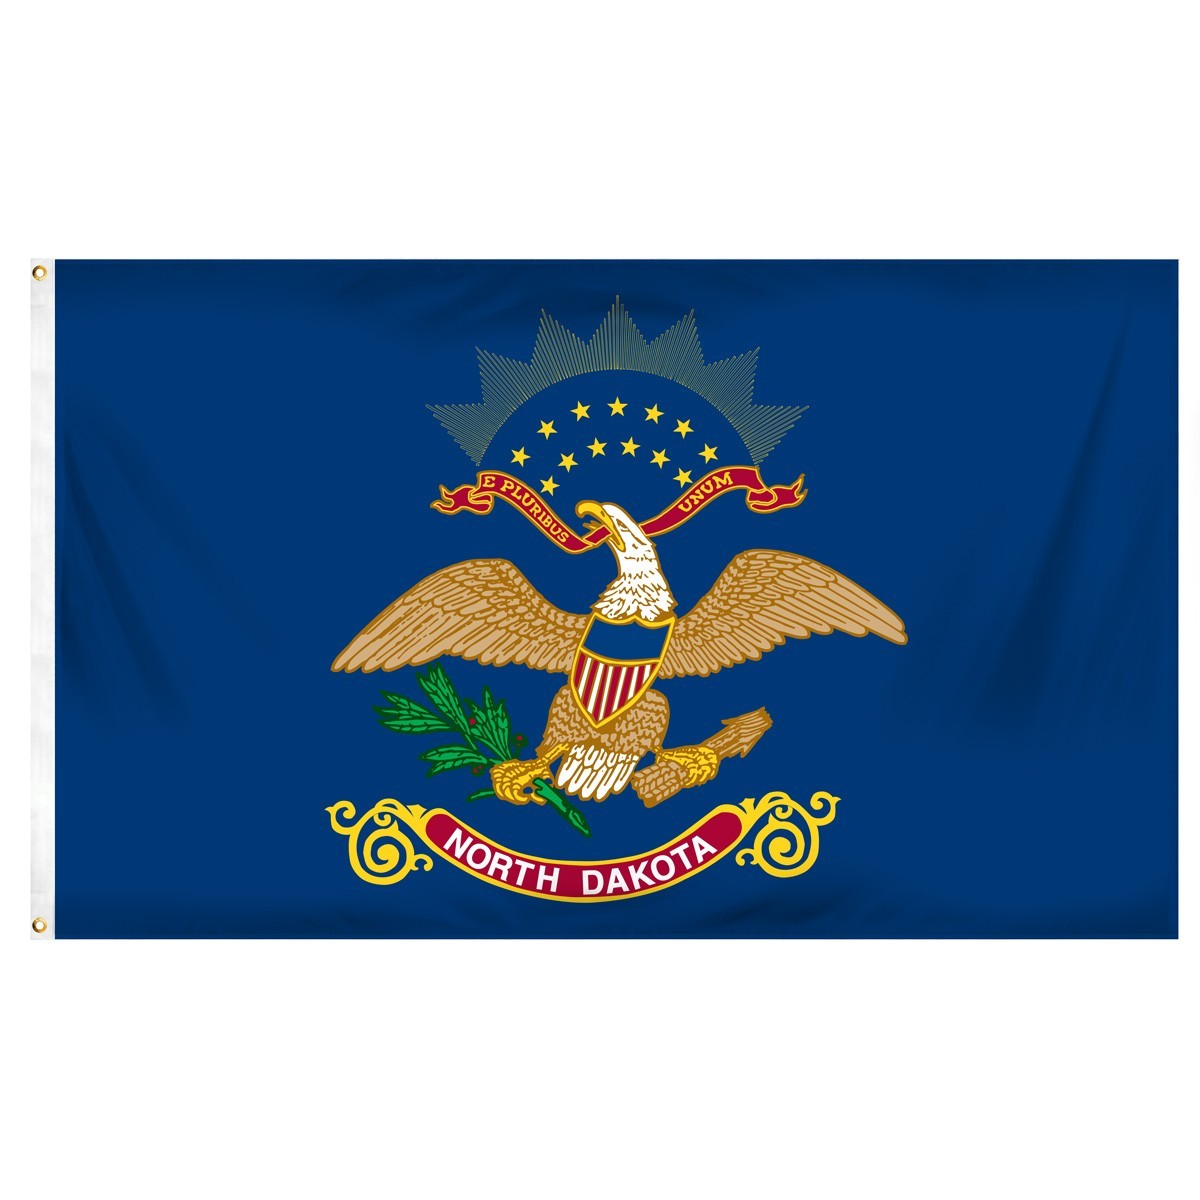 North Dakota school flags polyester and nylon for sale